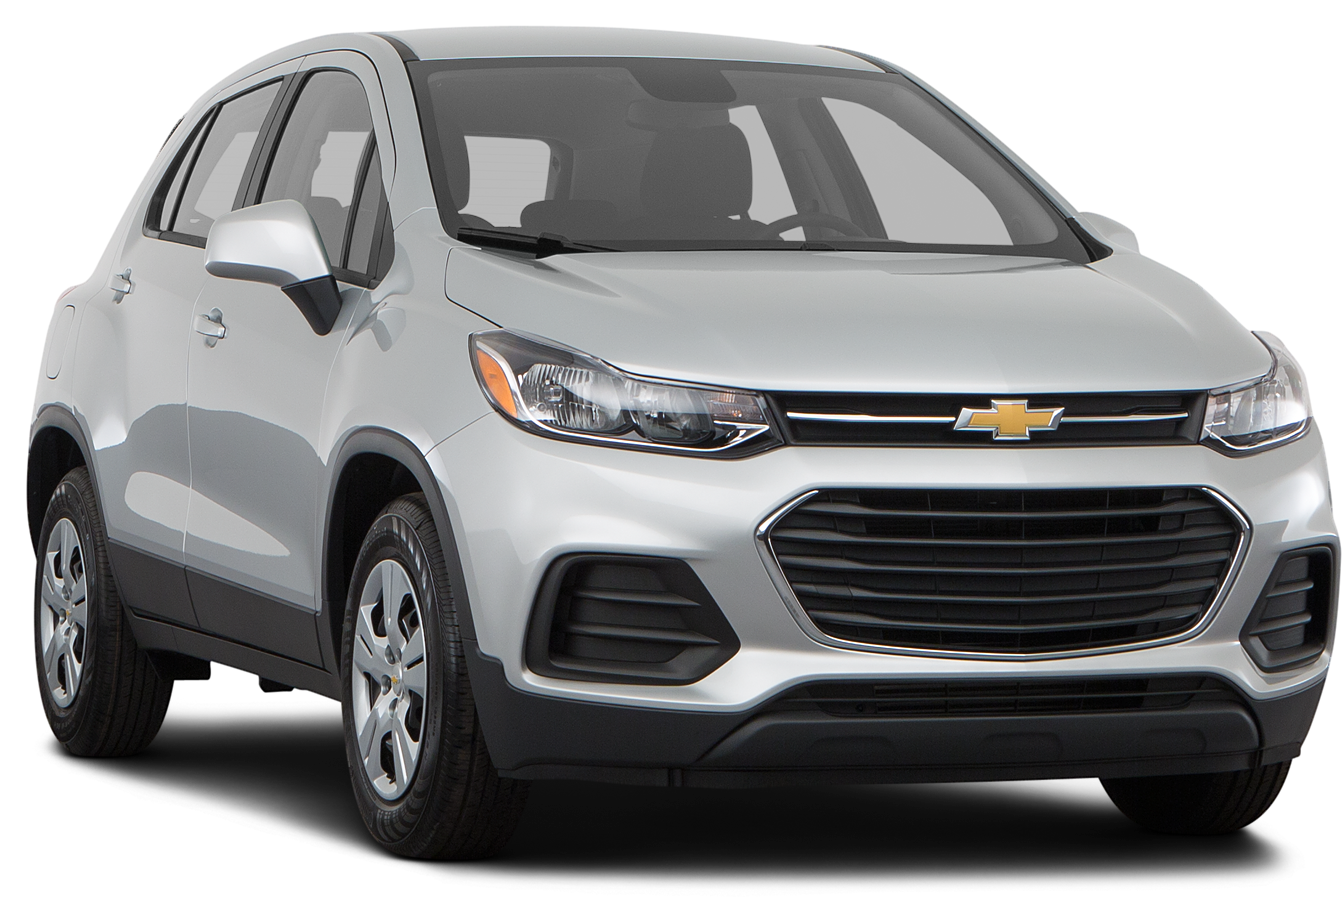 2019 Chevrolet Trax Incentives, Specials & Offers in KS